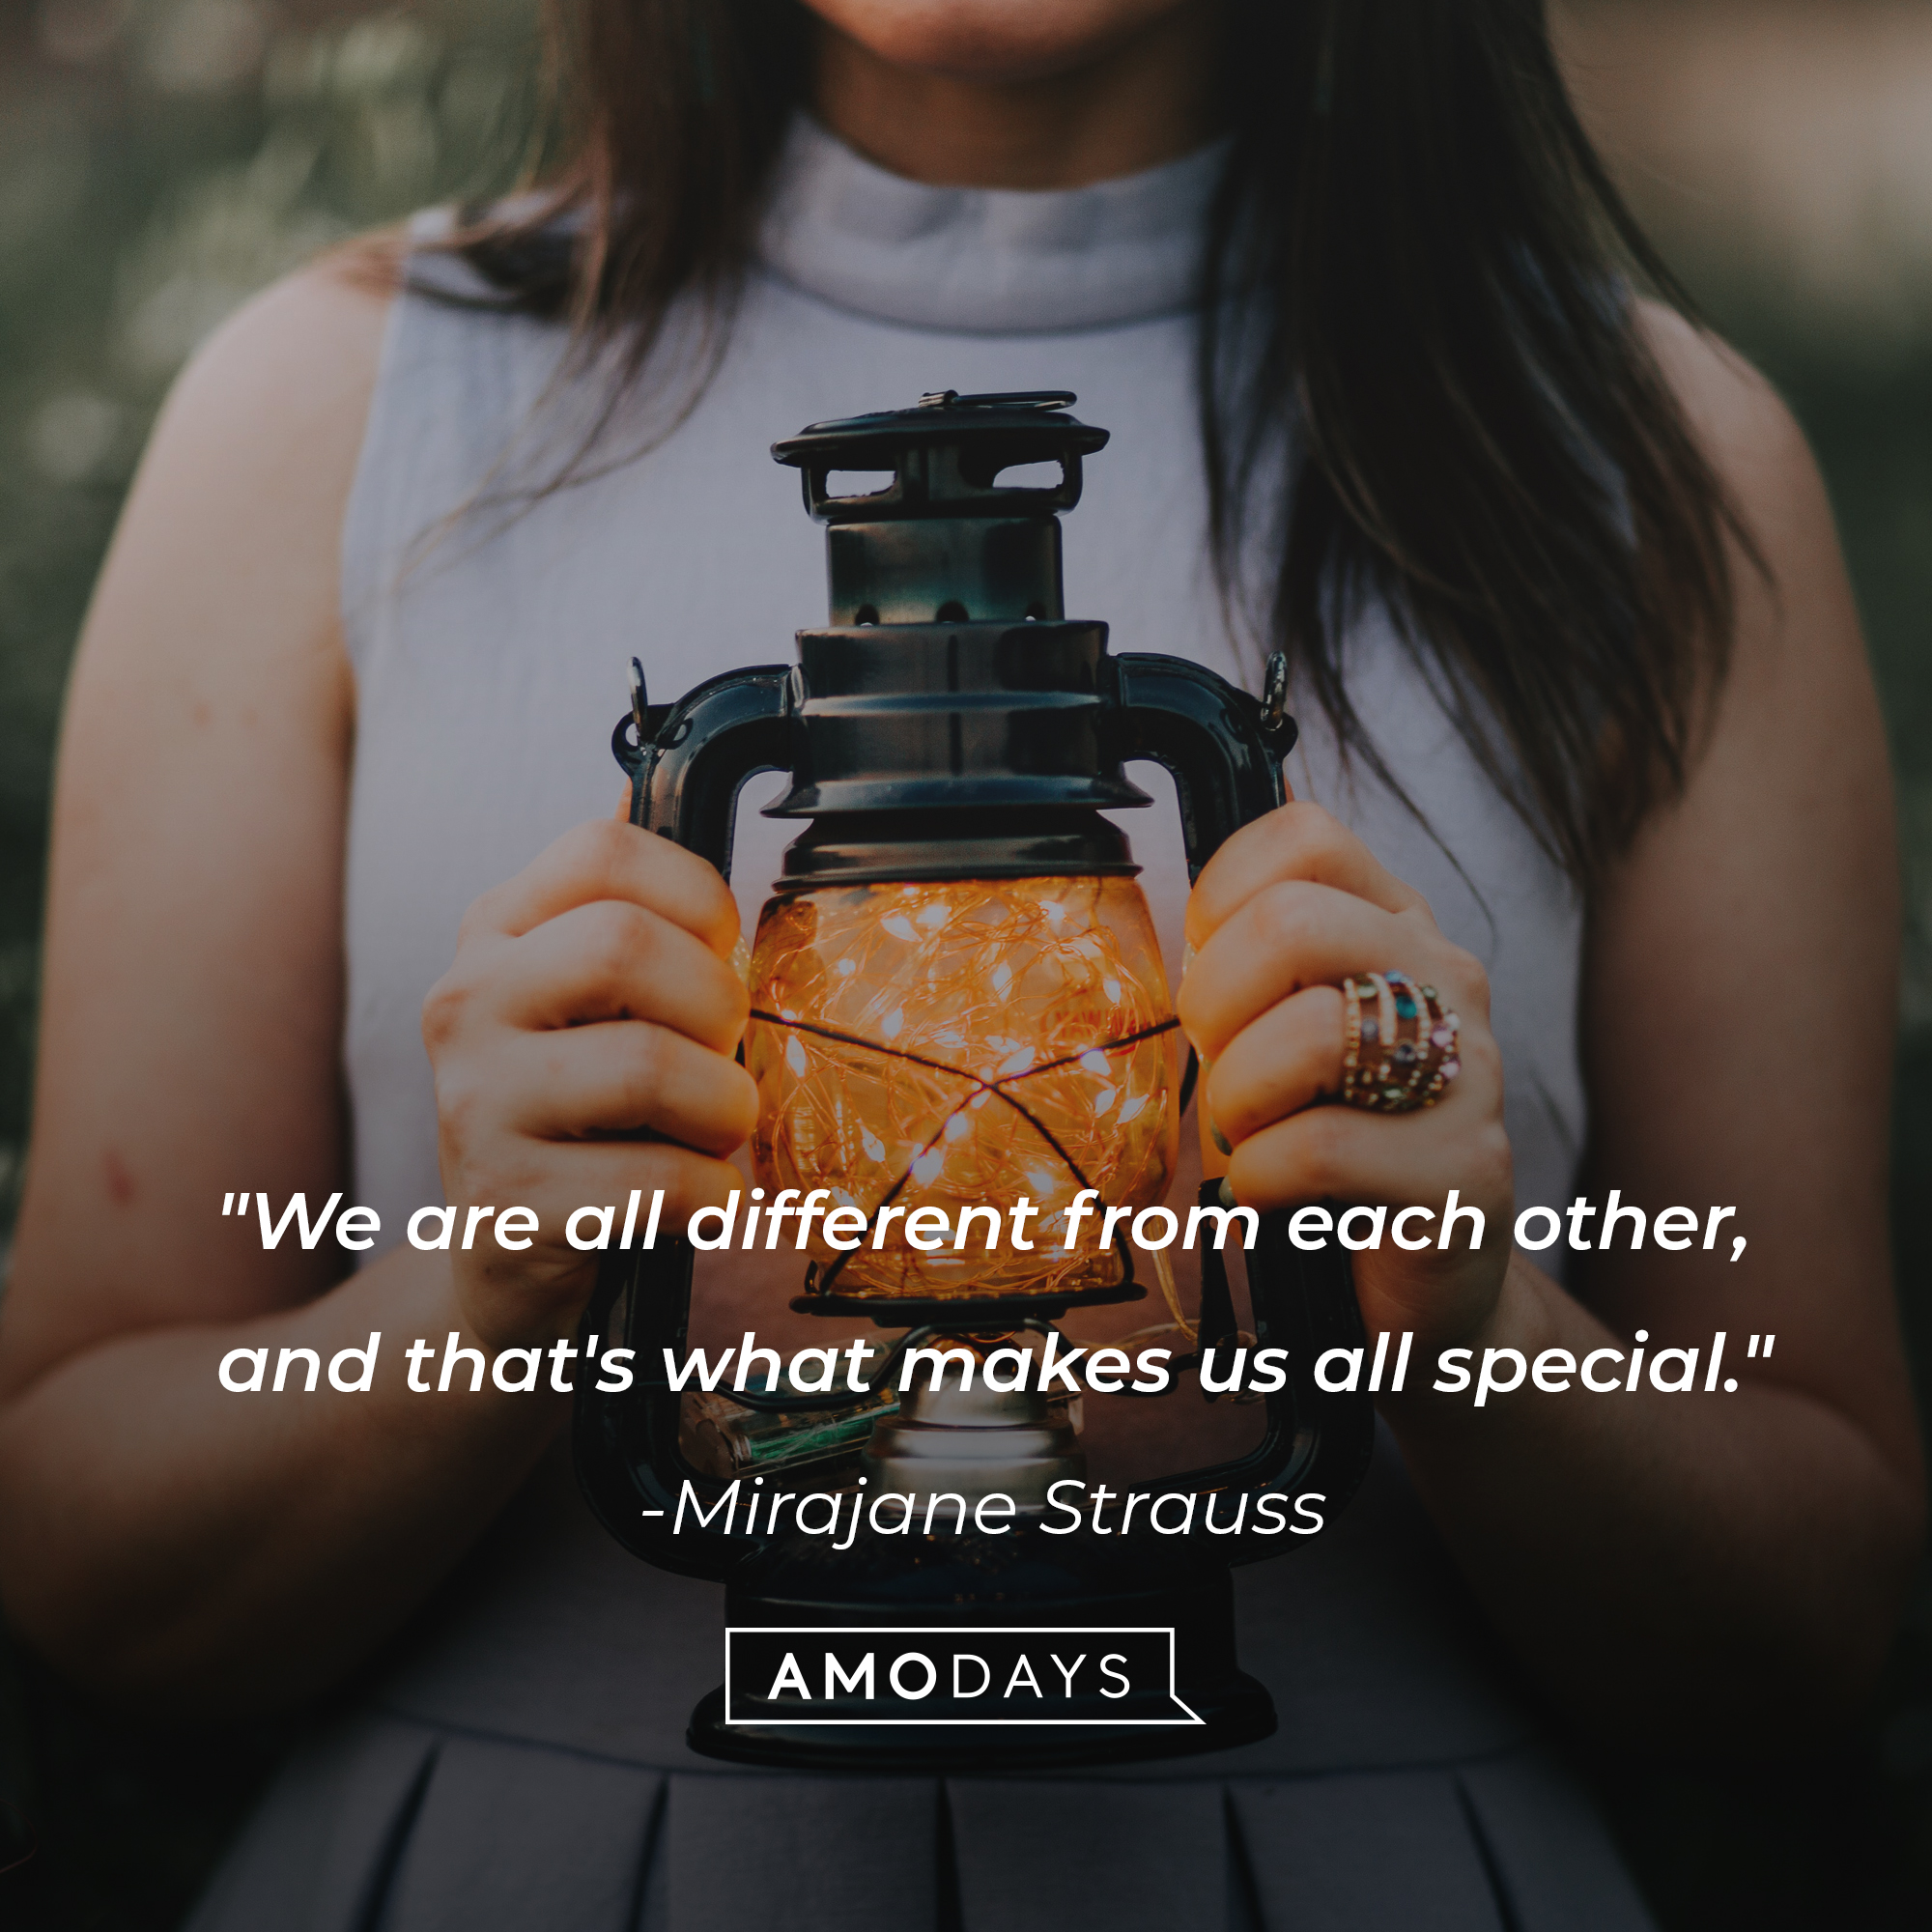 Mirajane Strauss' quote: "We are all different from each other, and that's what makes us all special." | Image: Unsplash